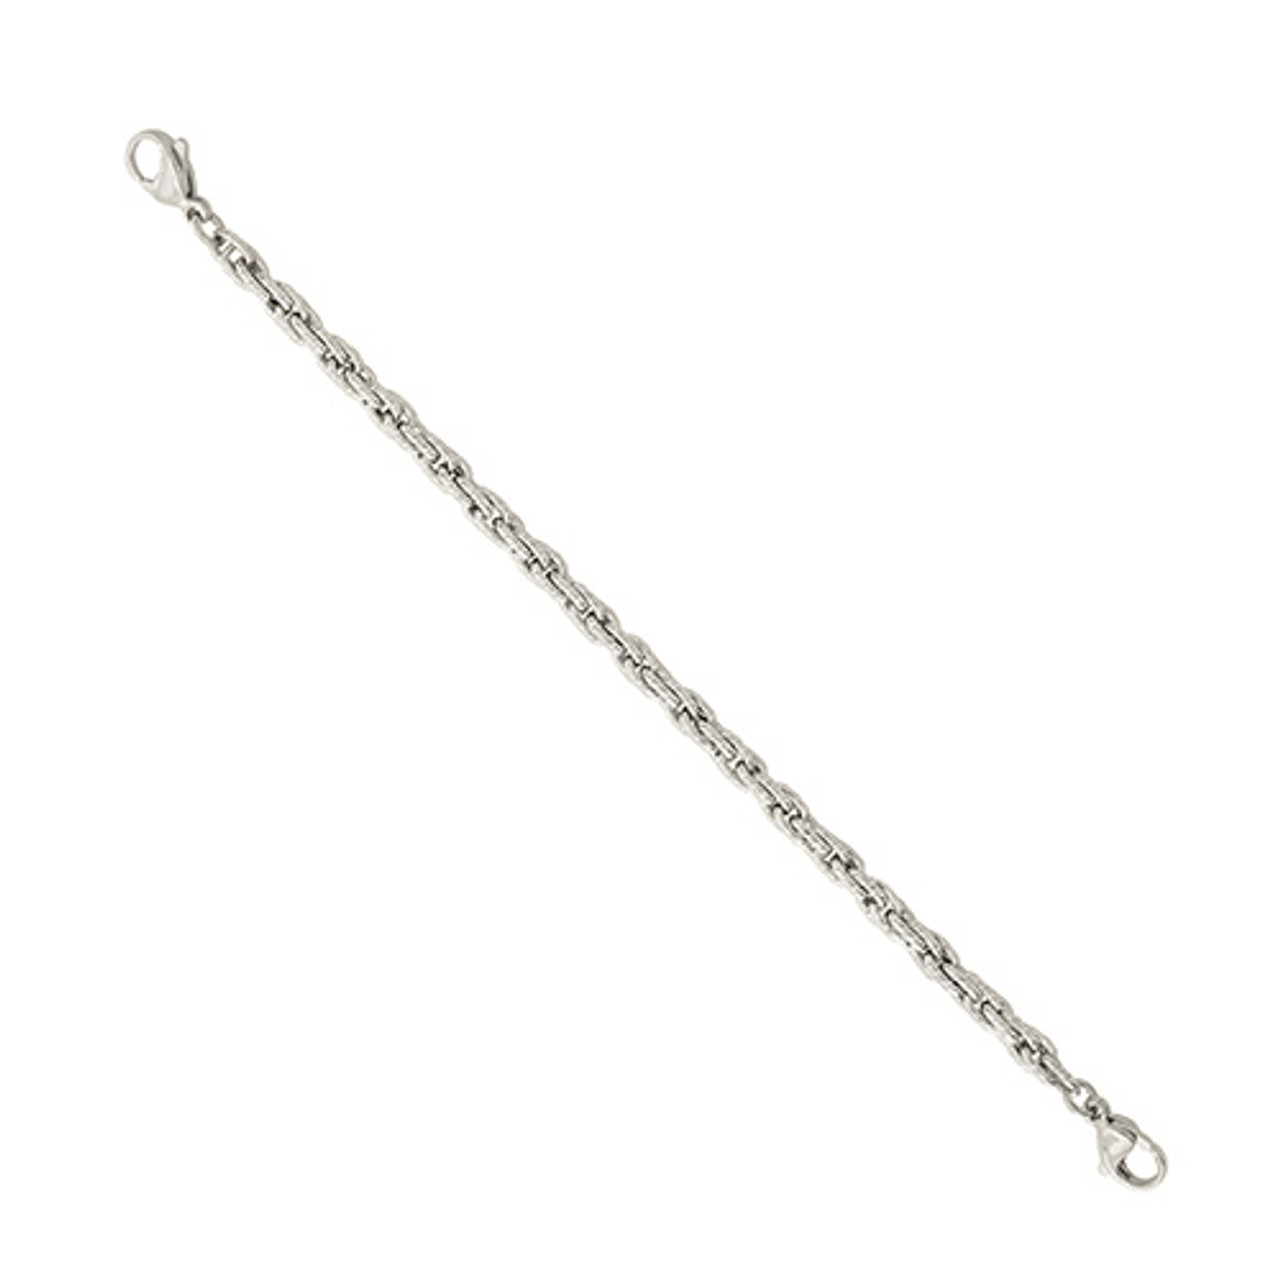 Amazon.com: Stainless Steel Ball Chain Necklace - 3.2mm, 36